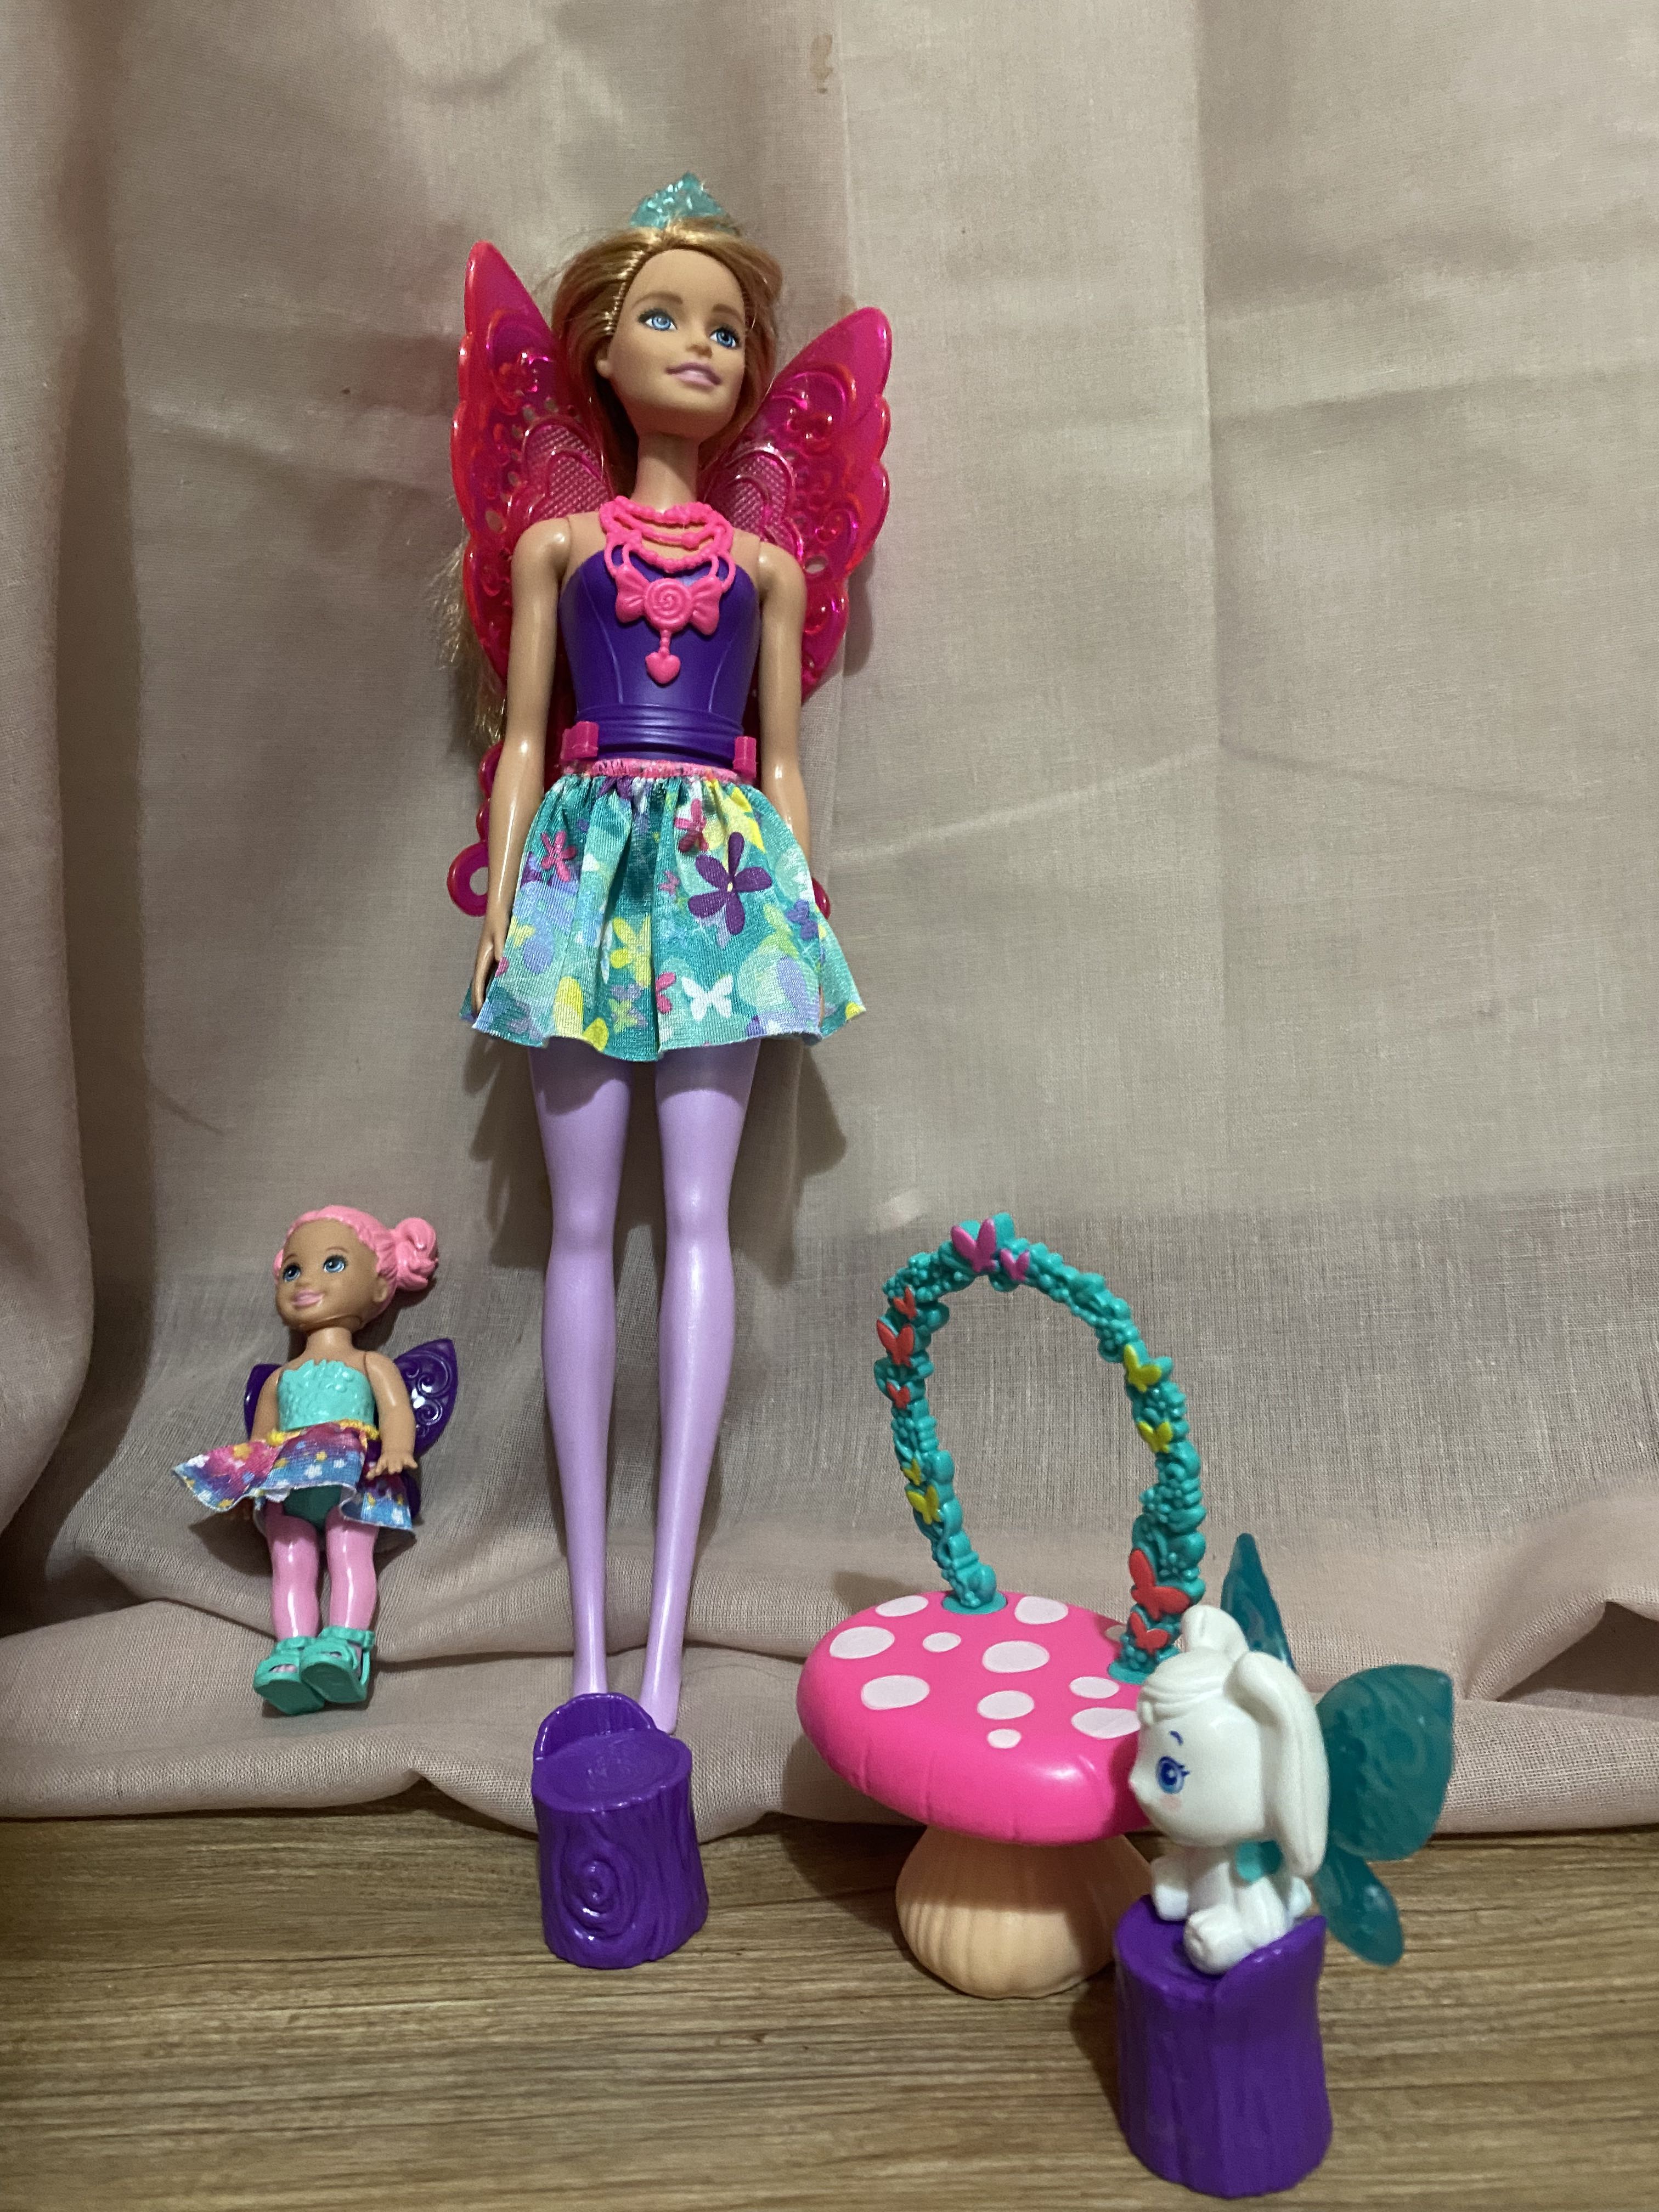 Barbie® Dreamtopia Tea Party Playset with Barbie® Fairy Doll and